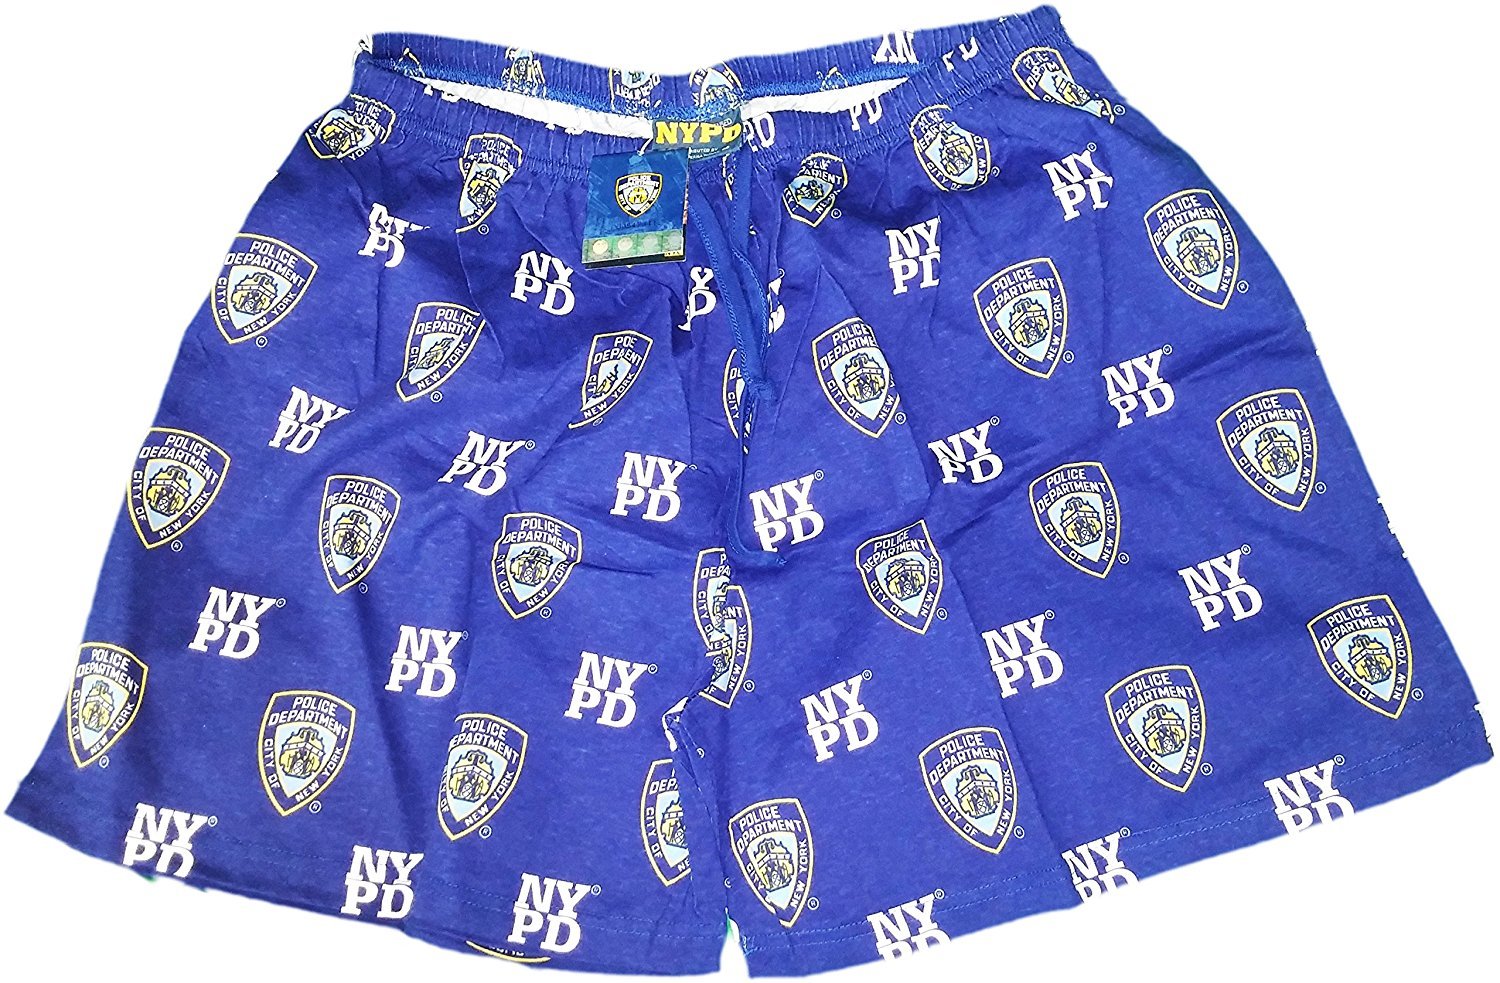 NYPD Boxer Shorts Blue Mens Sleepwear NYC Police Gift